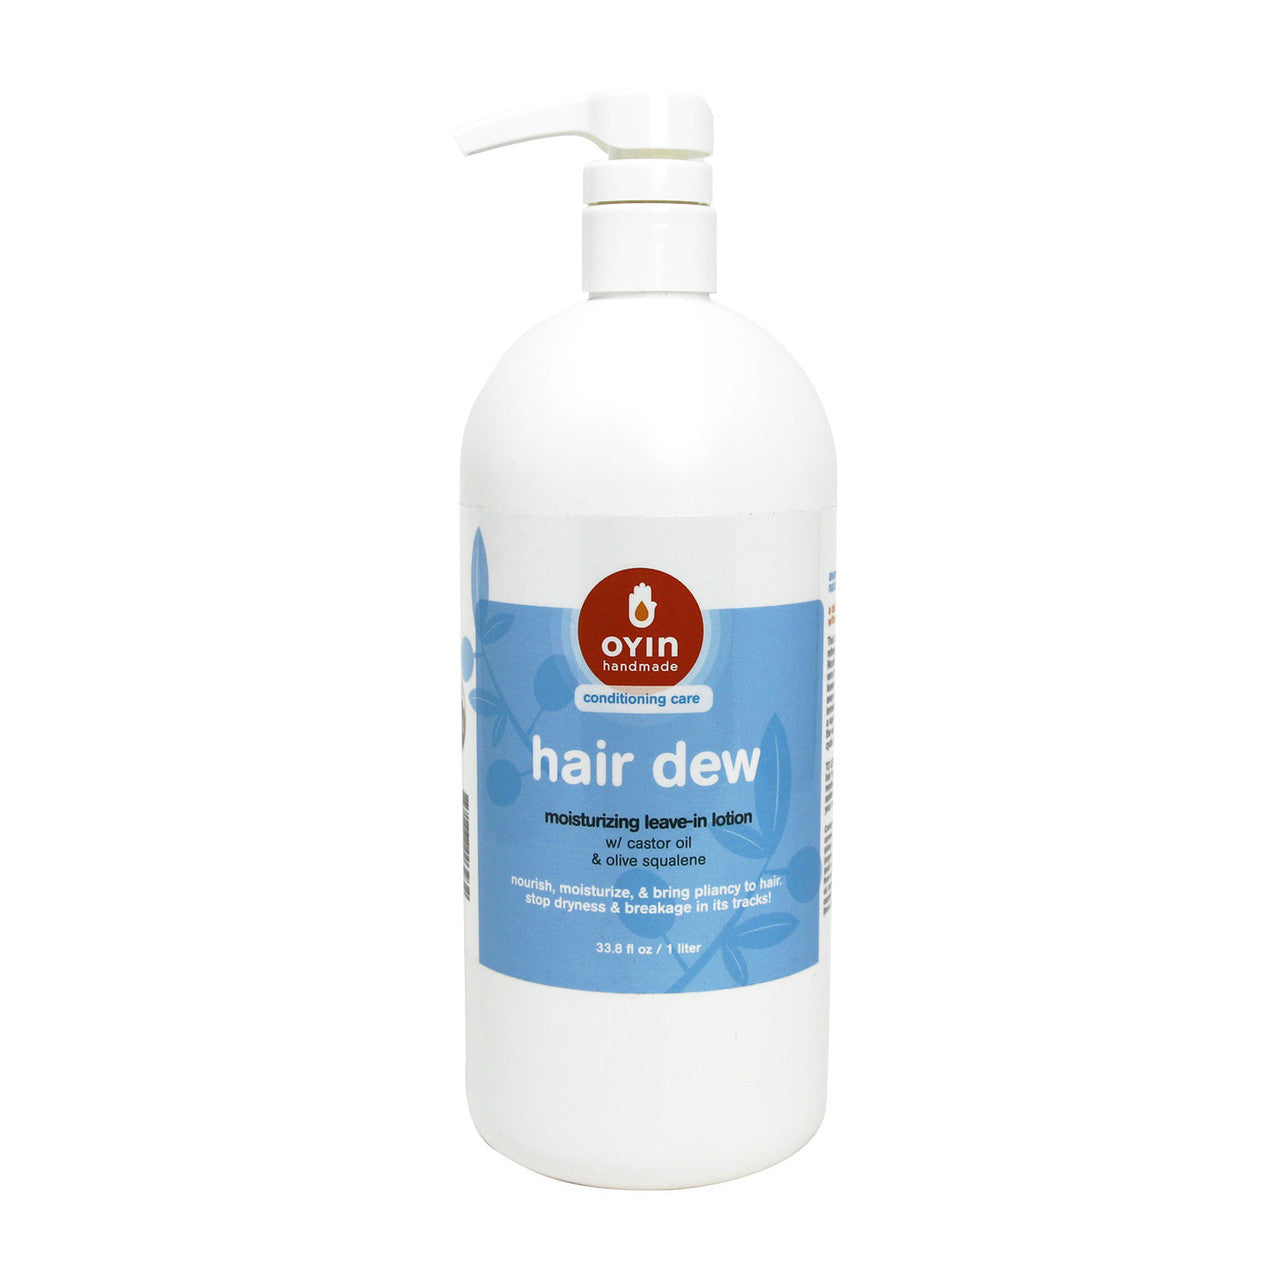 Hair Dew - is available in a 1-liter stock-up size bottle, which saves plastic! Image description: product in a 33oz refill bottle with blue and white label, with a pump.